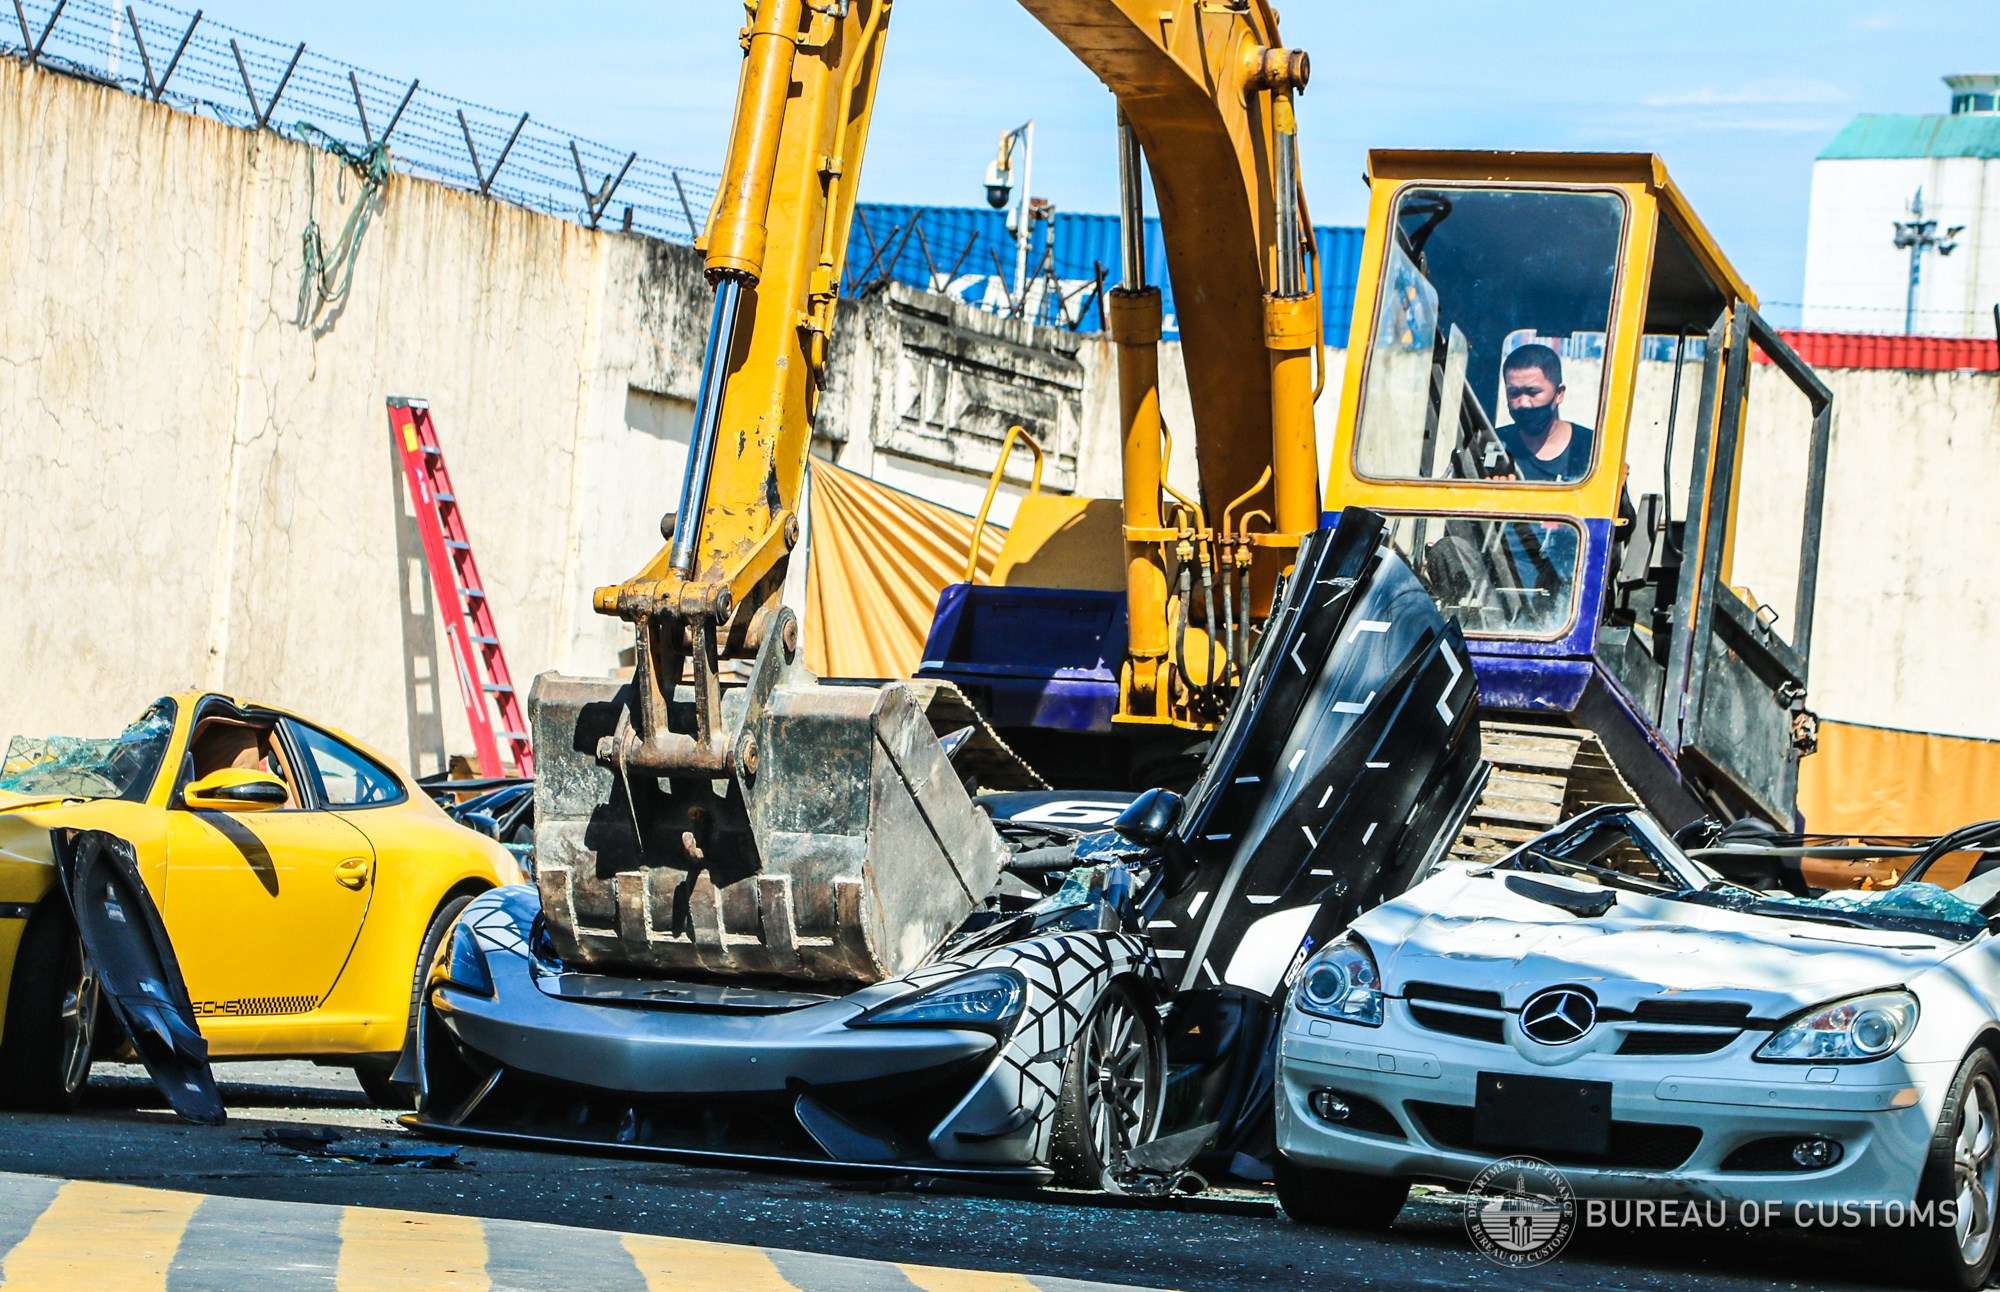 The destruction of the vehicles follows the Presidential Directive 2017-447, in which President Rodrigo Roa Duterte reiterated the need to destroy smuggled vehicles to send a strong message that the government is serious in its efforts against smuggling.